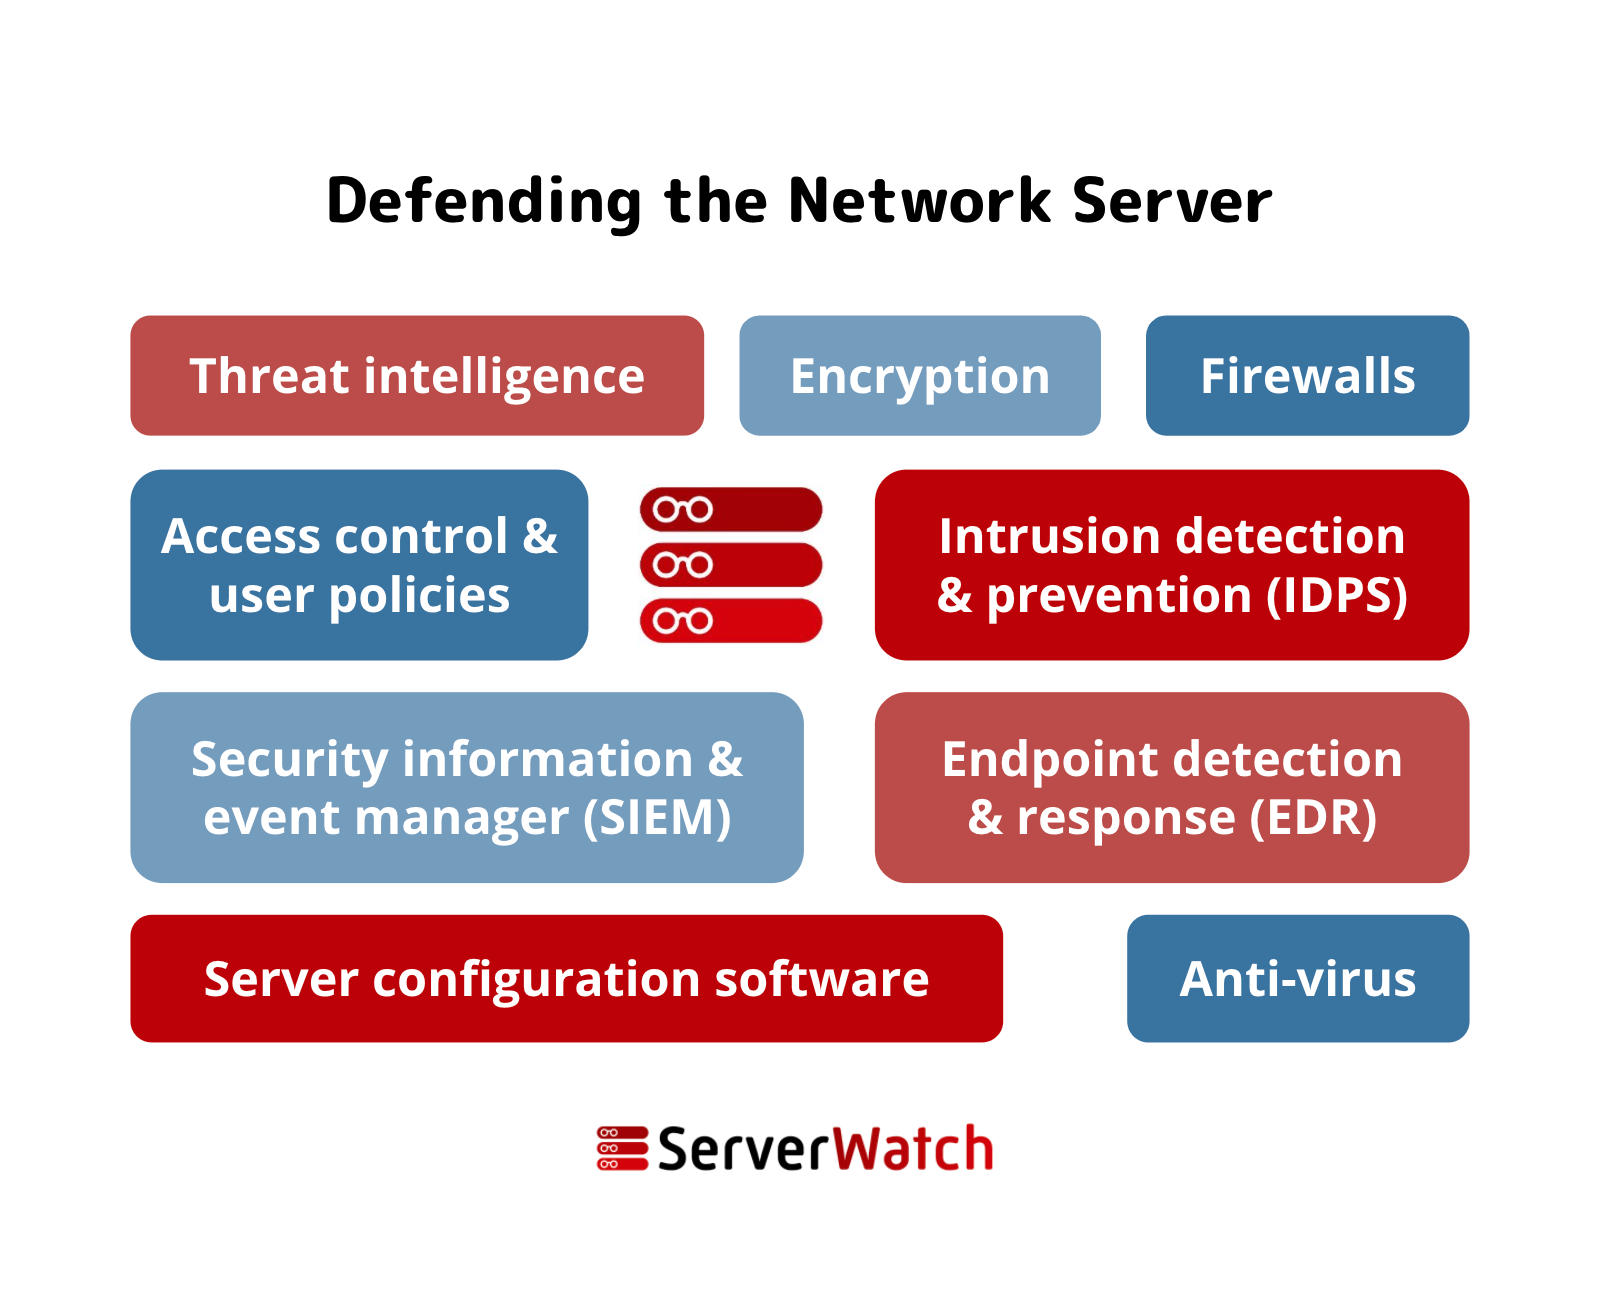 A graphic showing the different aspects of defending a network server. Designed by Sam Ingalls.